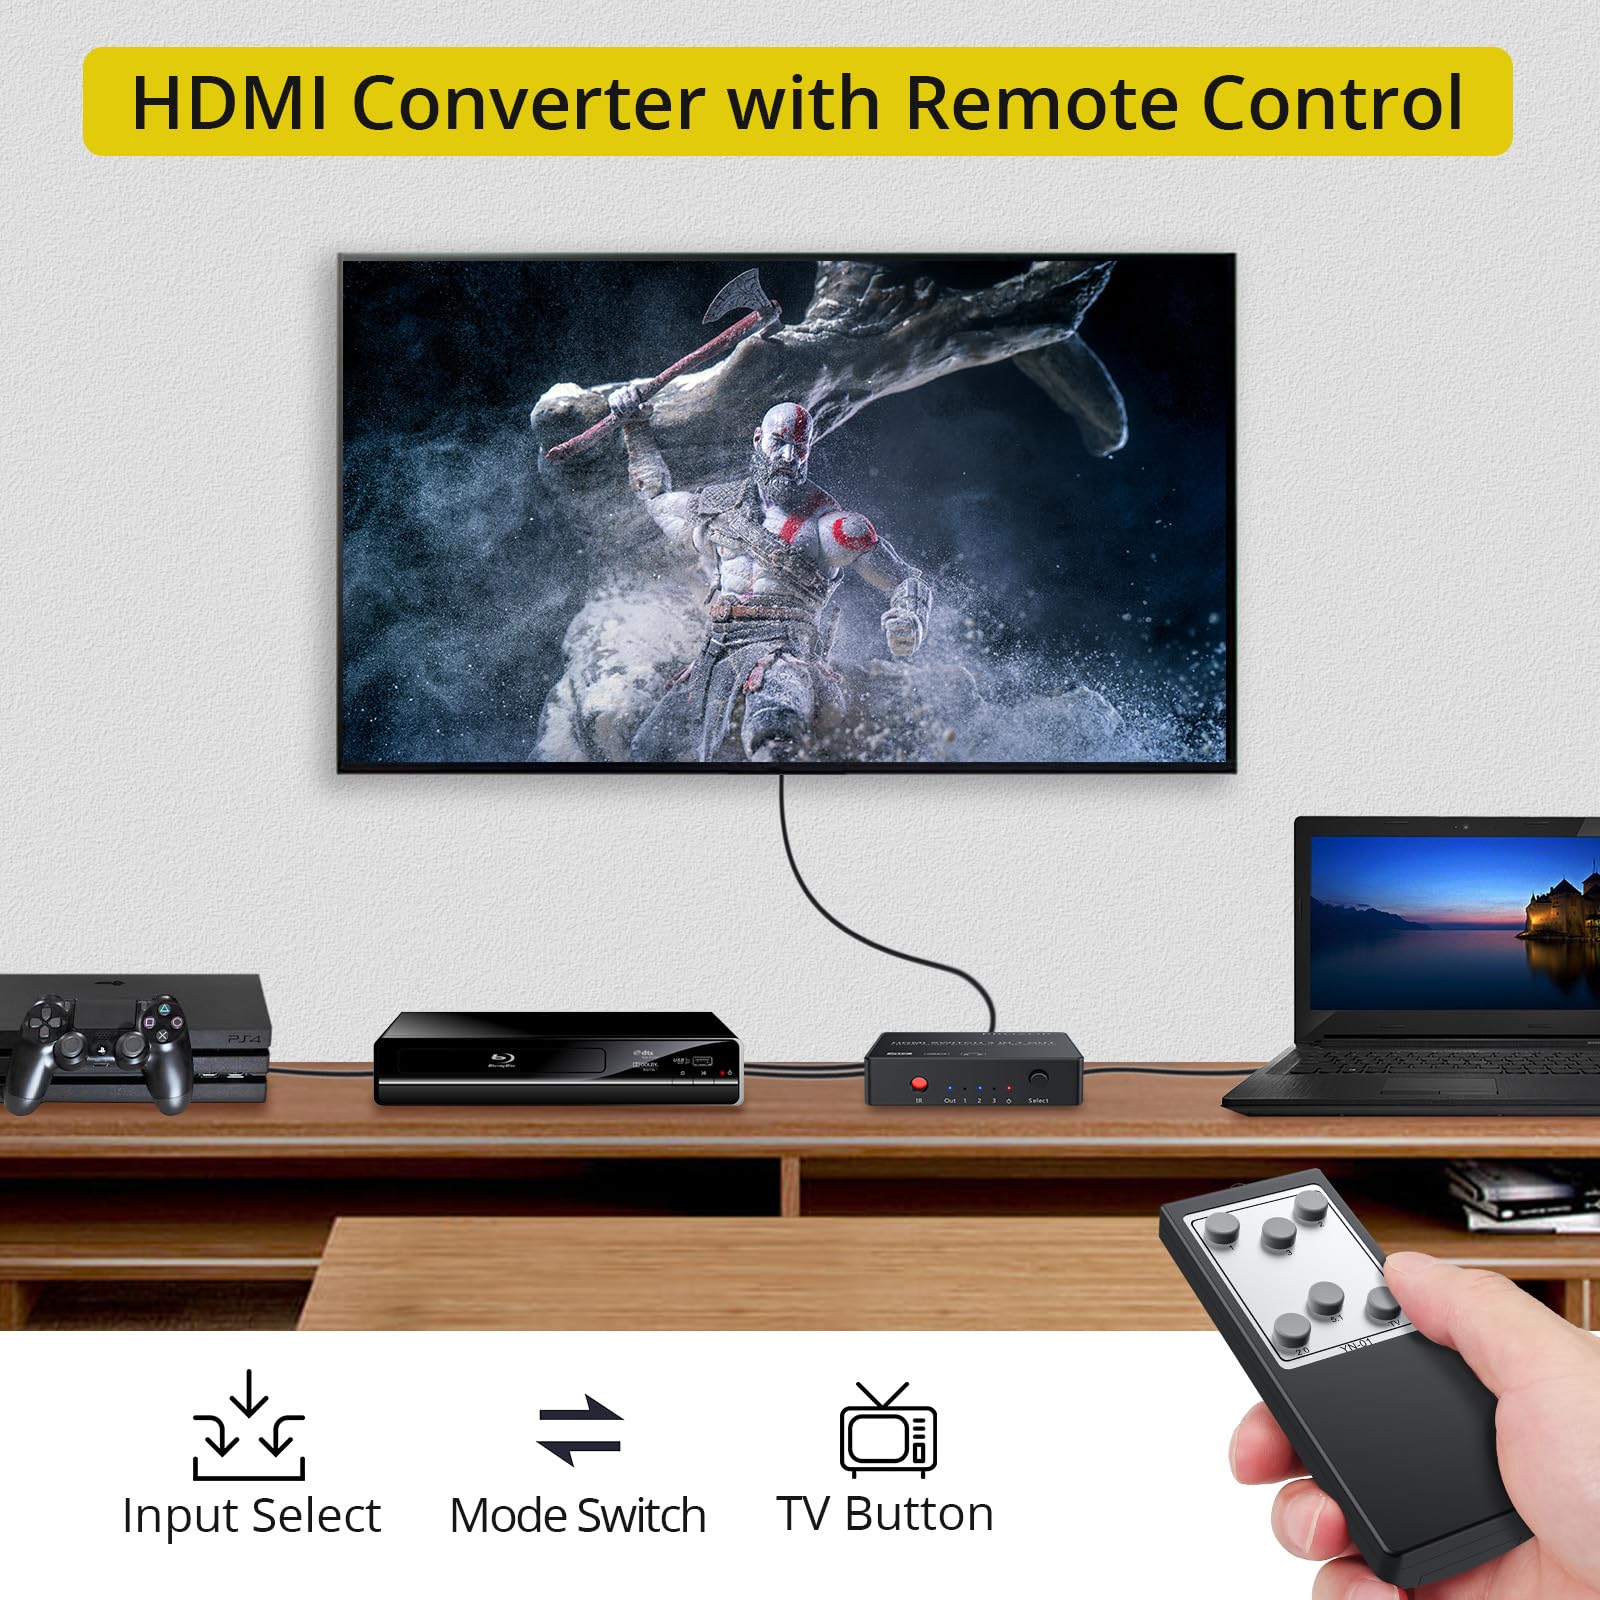 Make sure that the TV is set to the correct input source for the HDMI connection.
Use the TV remote or the buttons on the TV itself to navigate through the input sources and select the appropriate HDMI input.